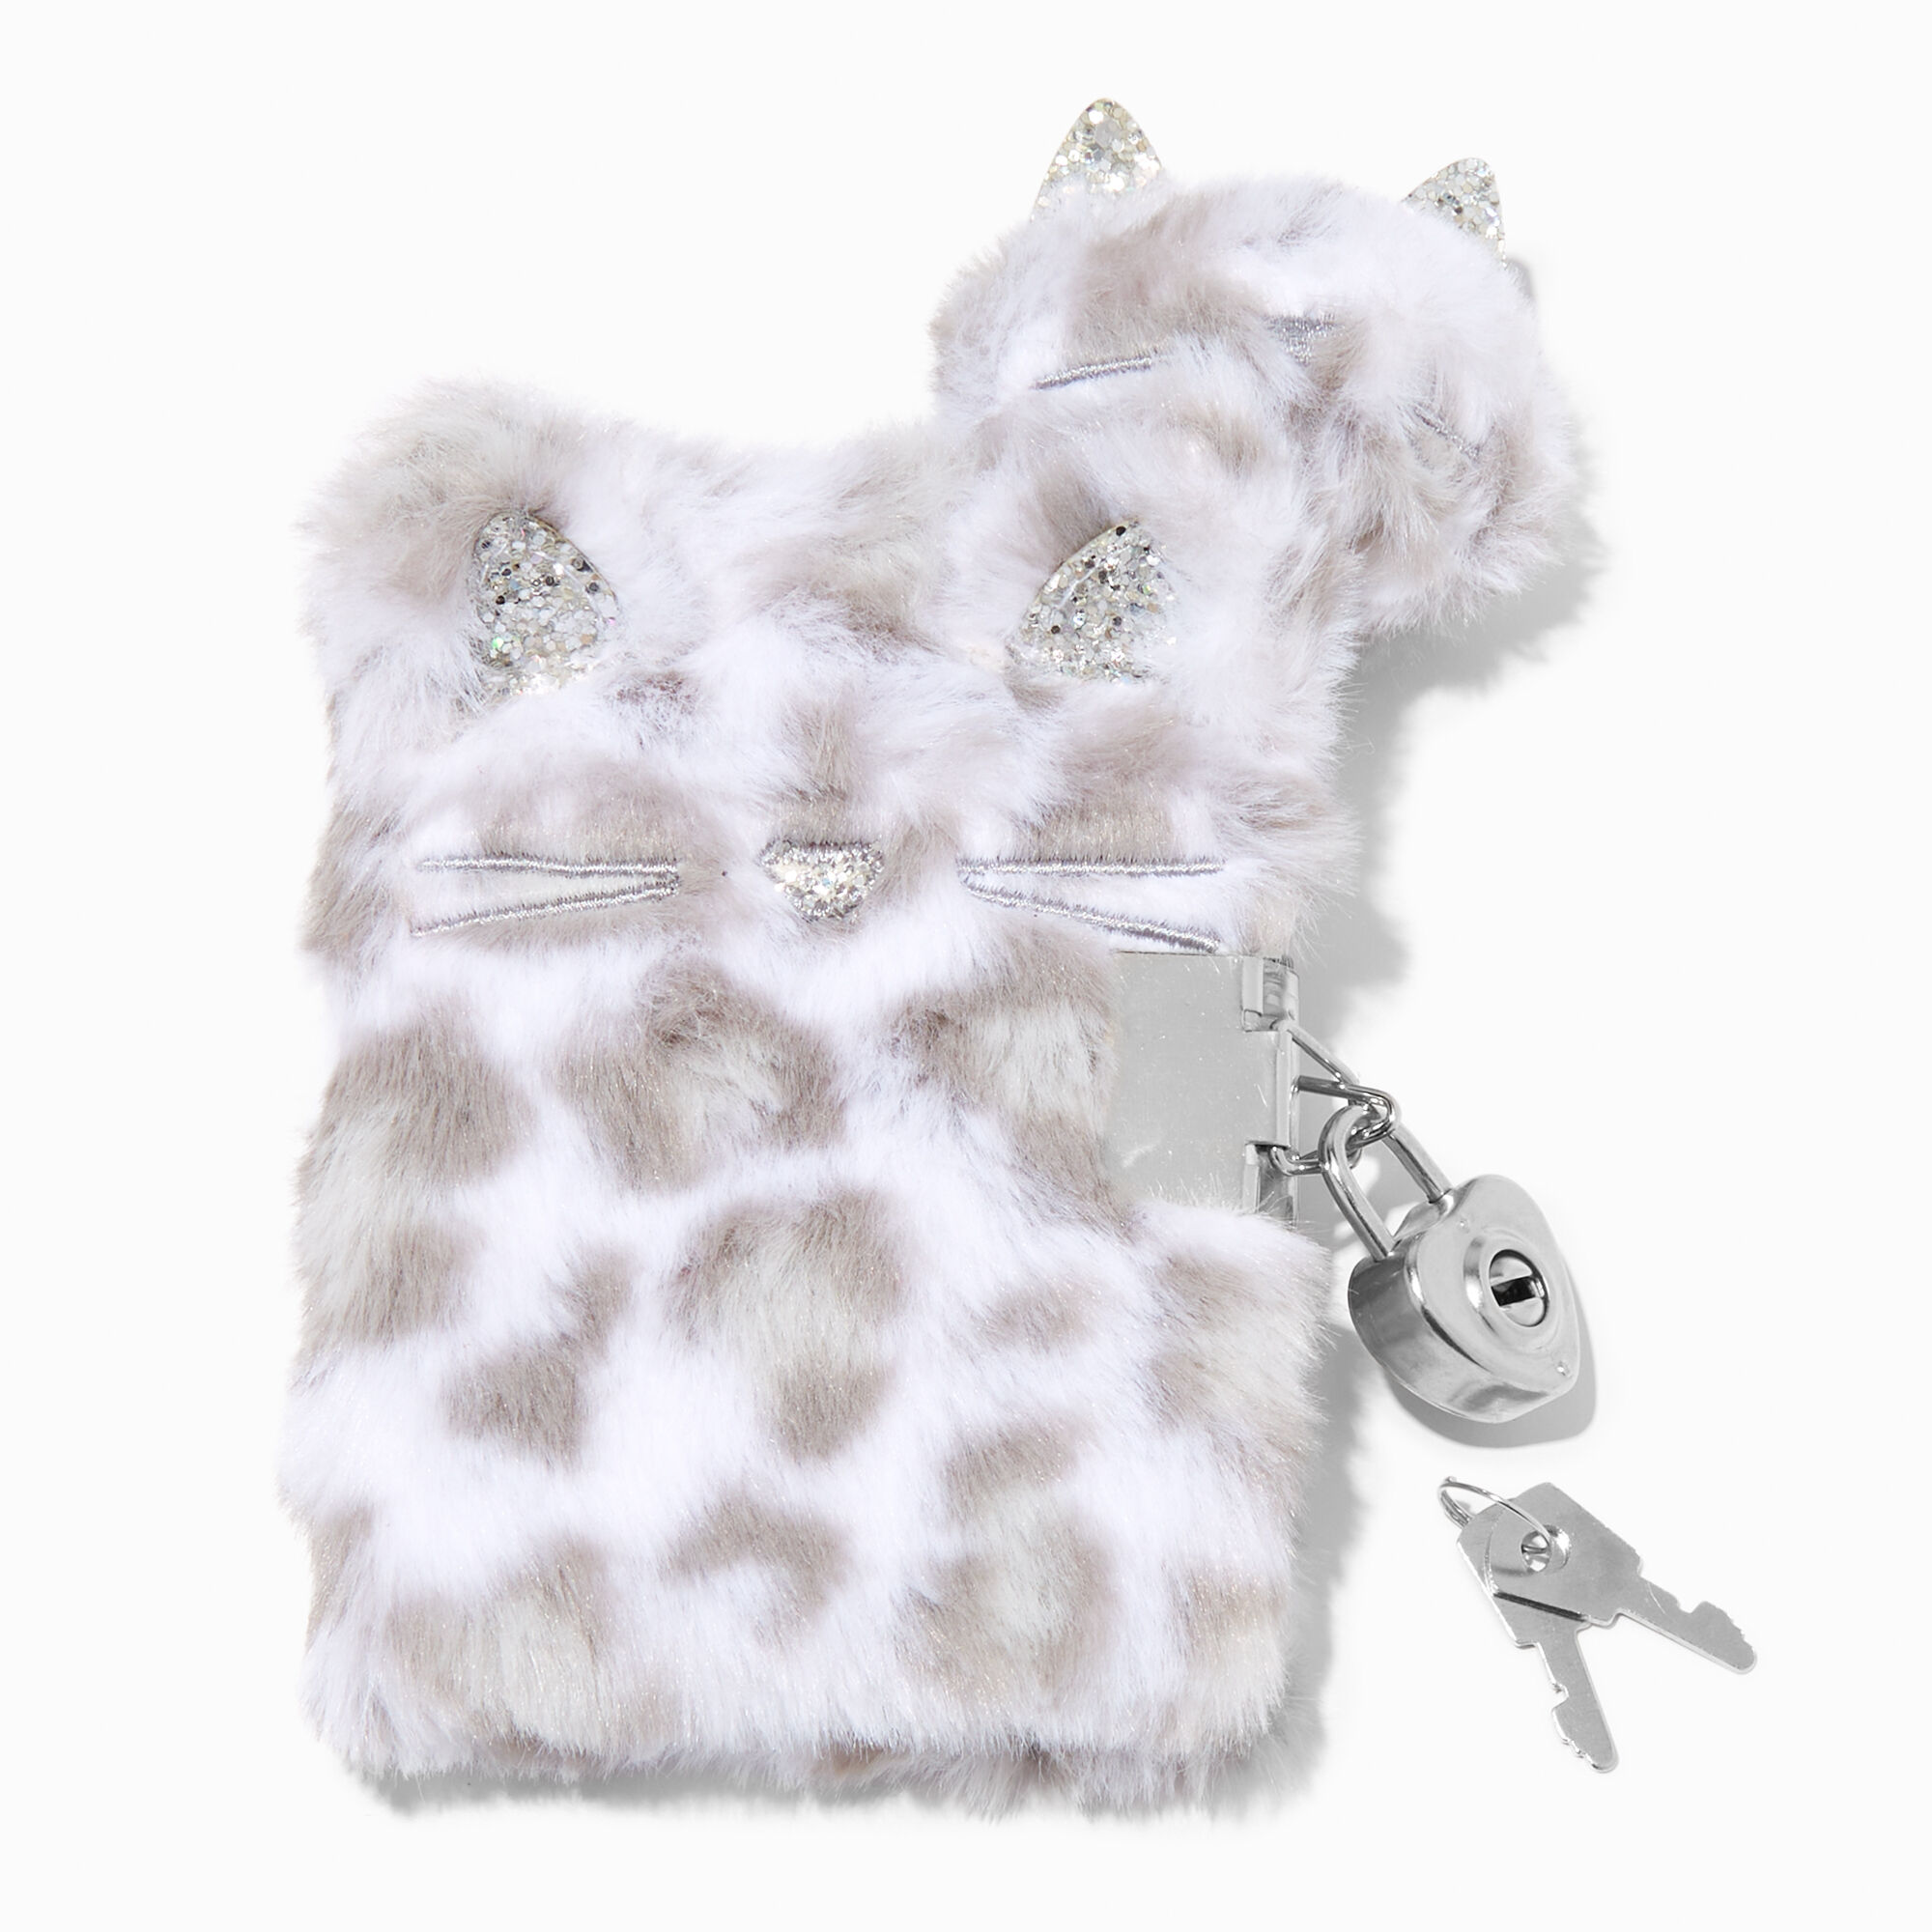 View Claires Club Snow Leopard Plush Diary information